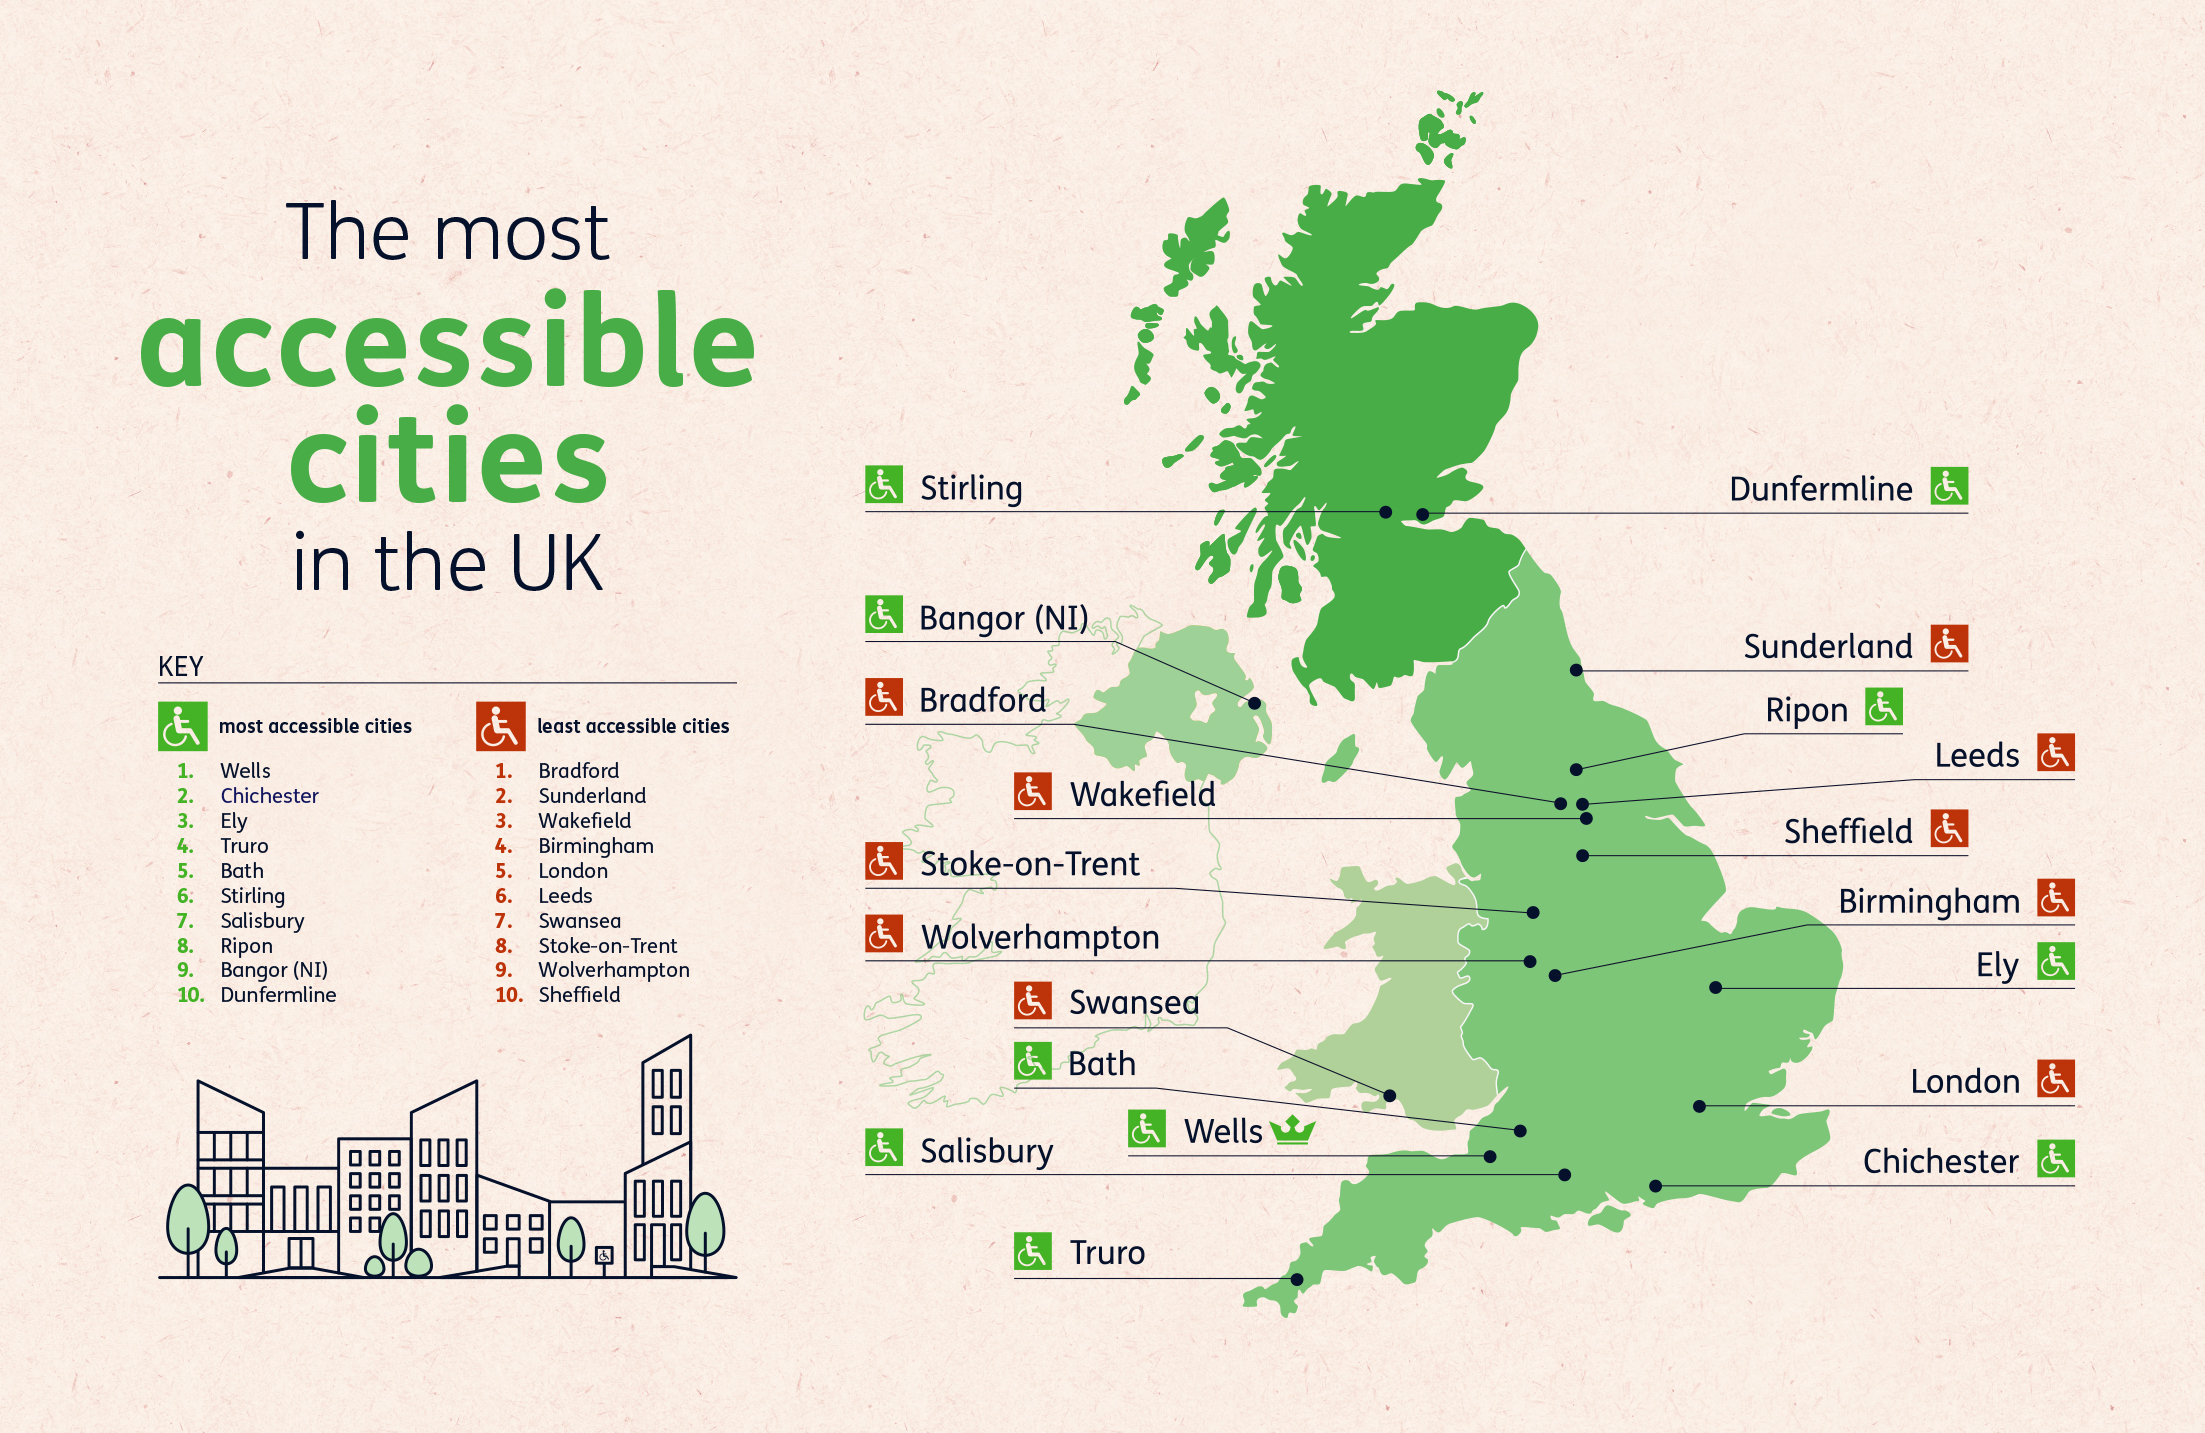 The most accessible and least accessible cities in the UK